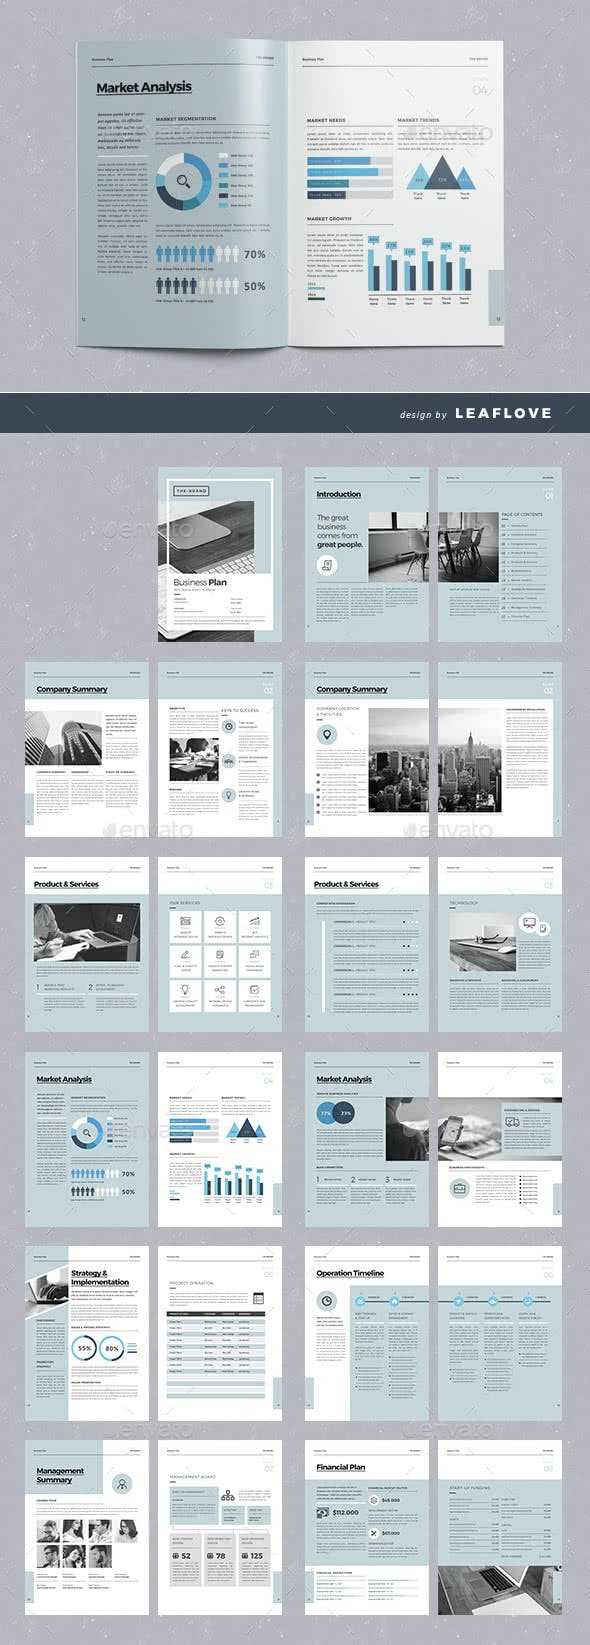 75 Fresh Indesign Templates (And Where To Find More) Intended For Free Indesign Report Templates